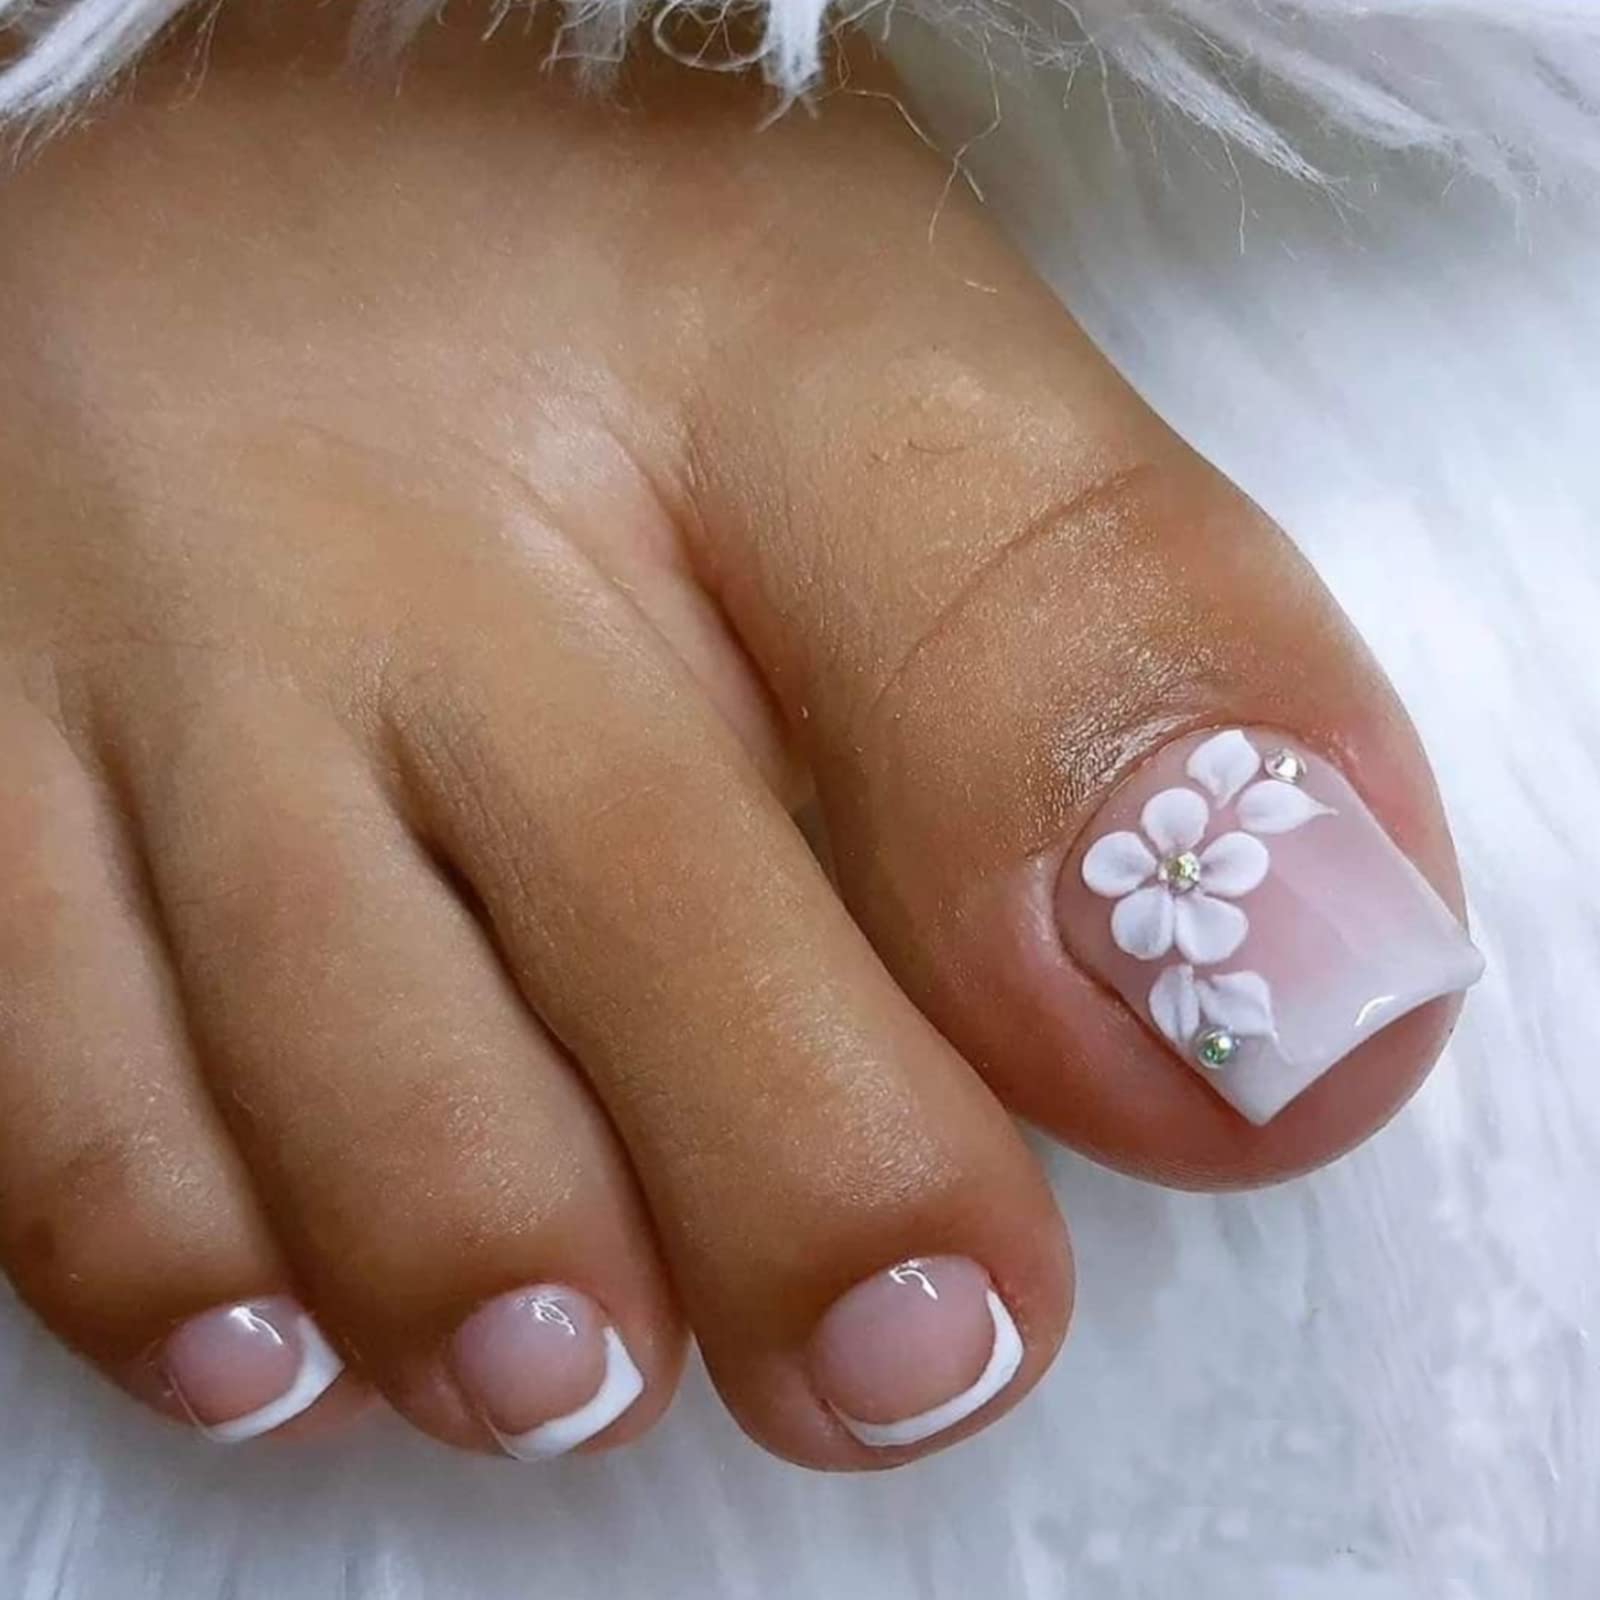 50+ Amazing Designs of Acrylic Toe Nails - You Should Try